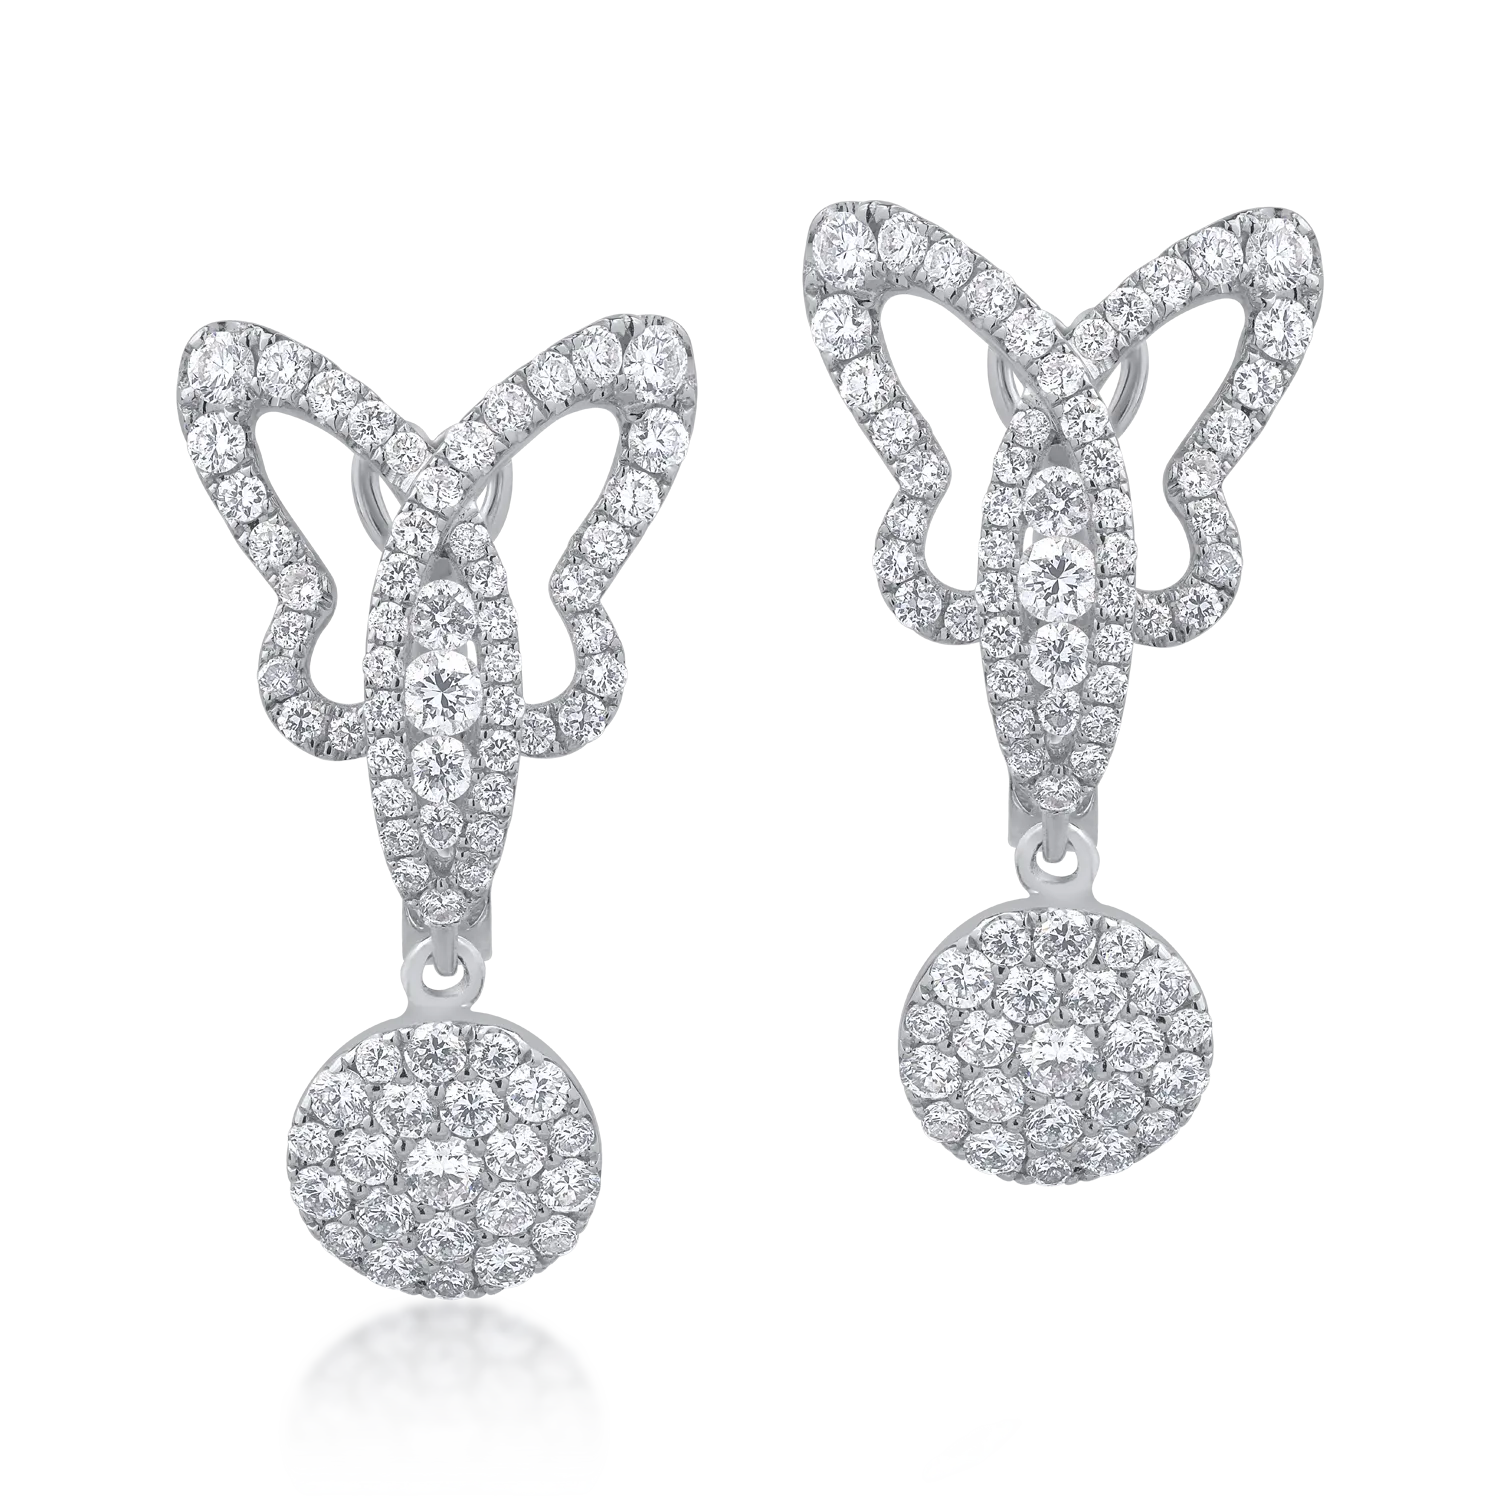 18K white gold earrings with 1.15ct diamonds